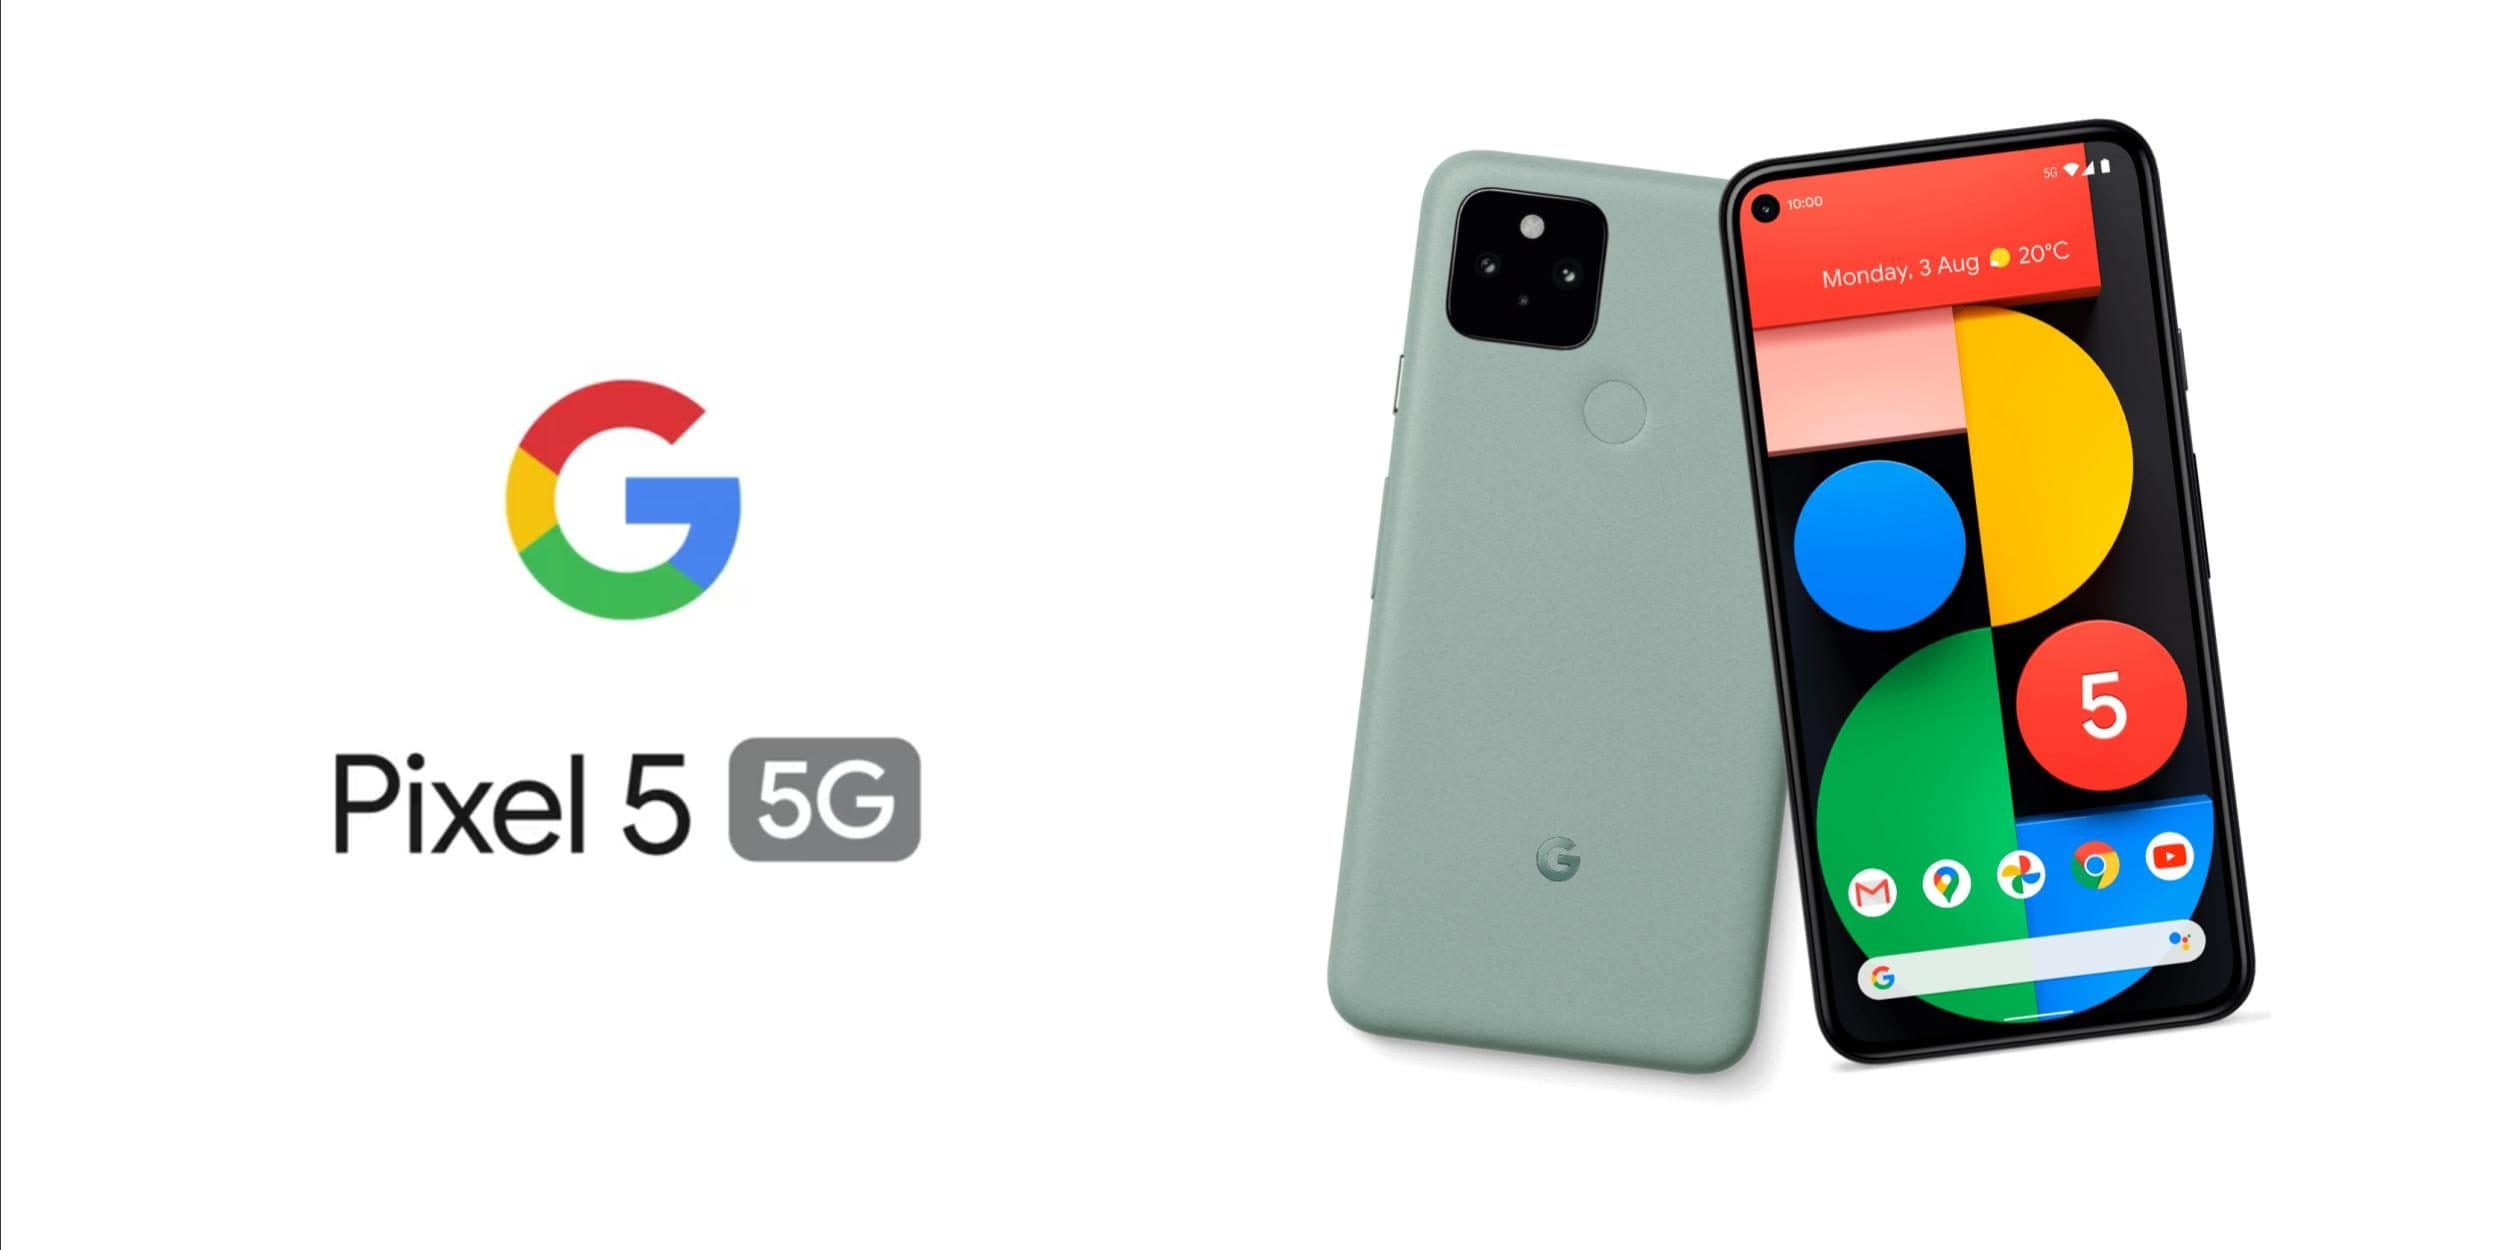 Presented Pixel 5 and Pixel 4a 5G